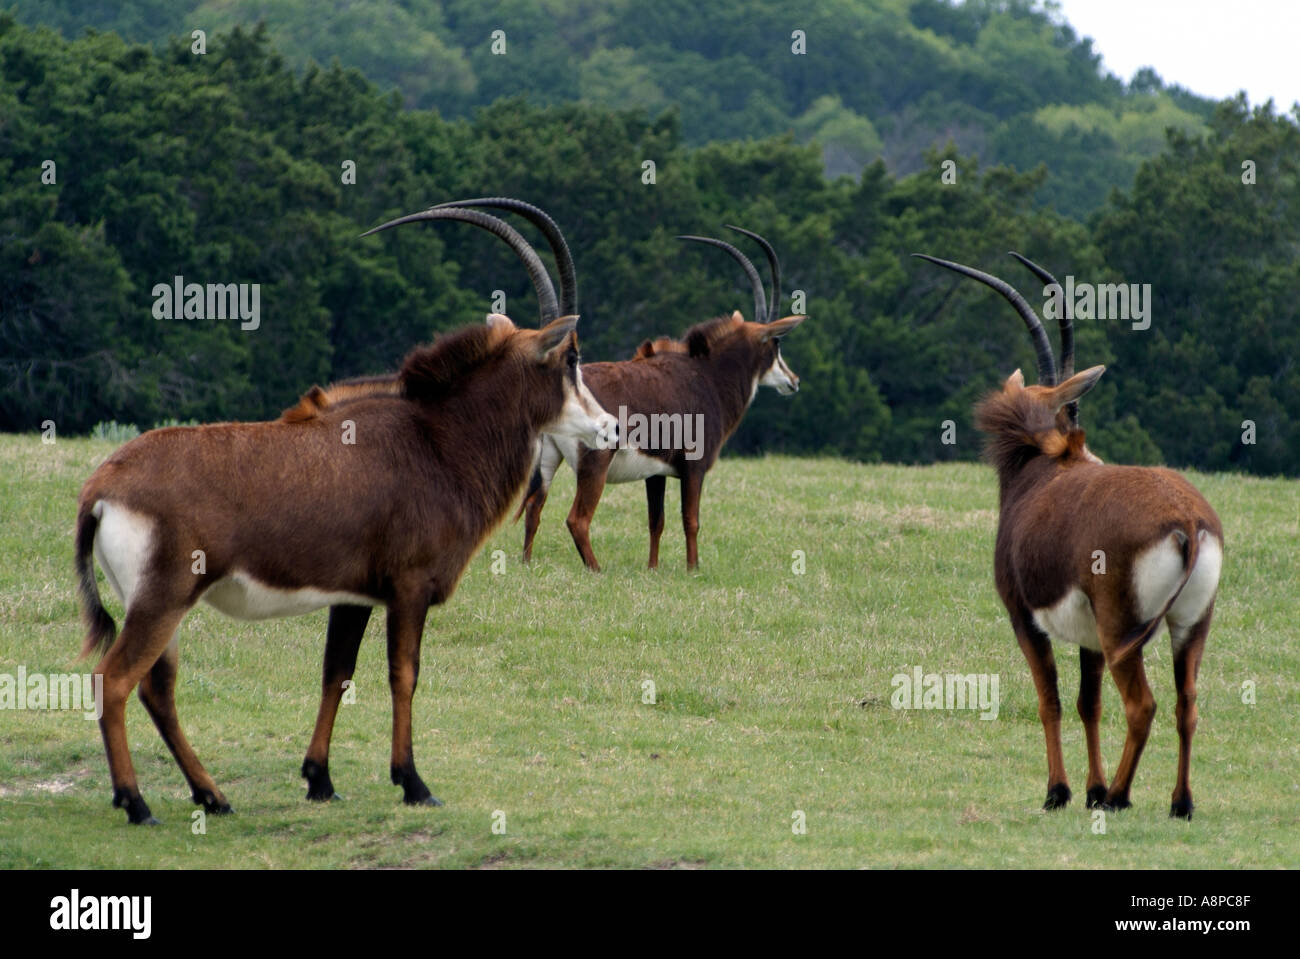 Herd of sable antelopes grazing in a meadow Stock Photo